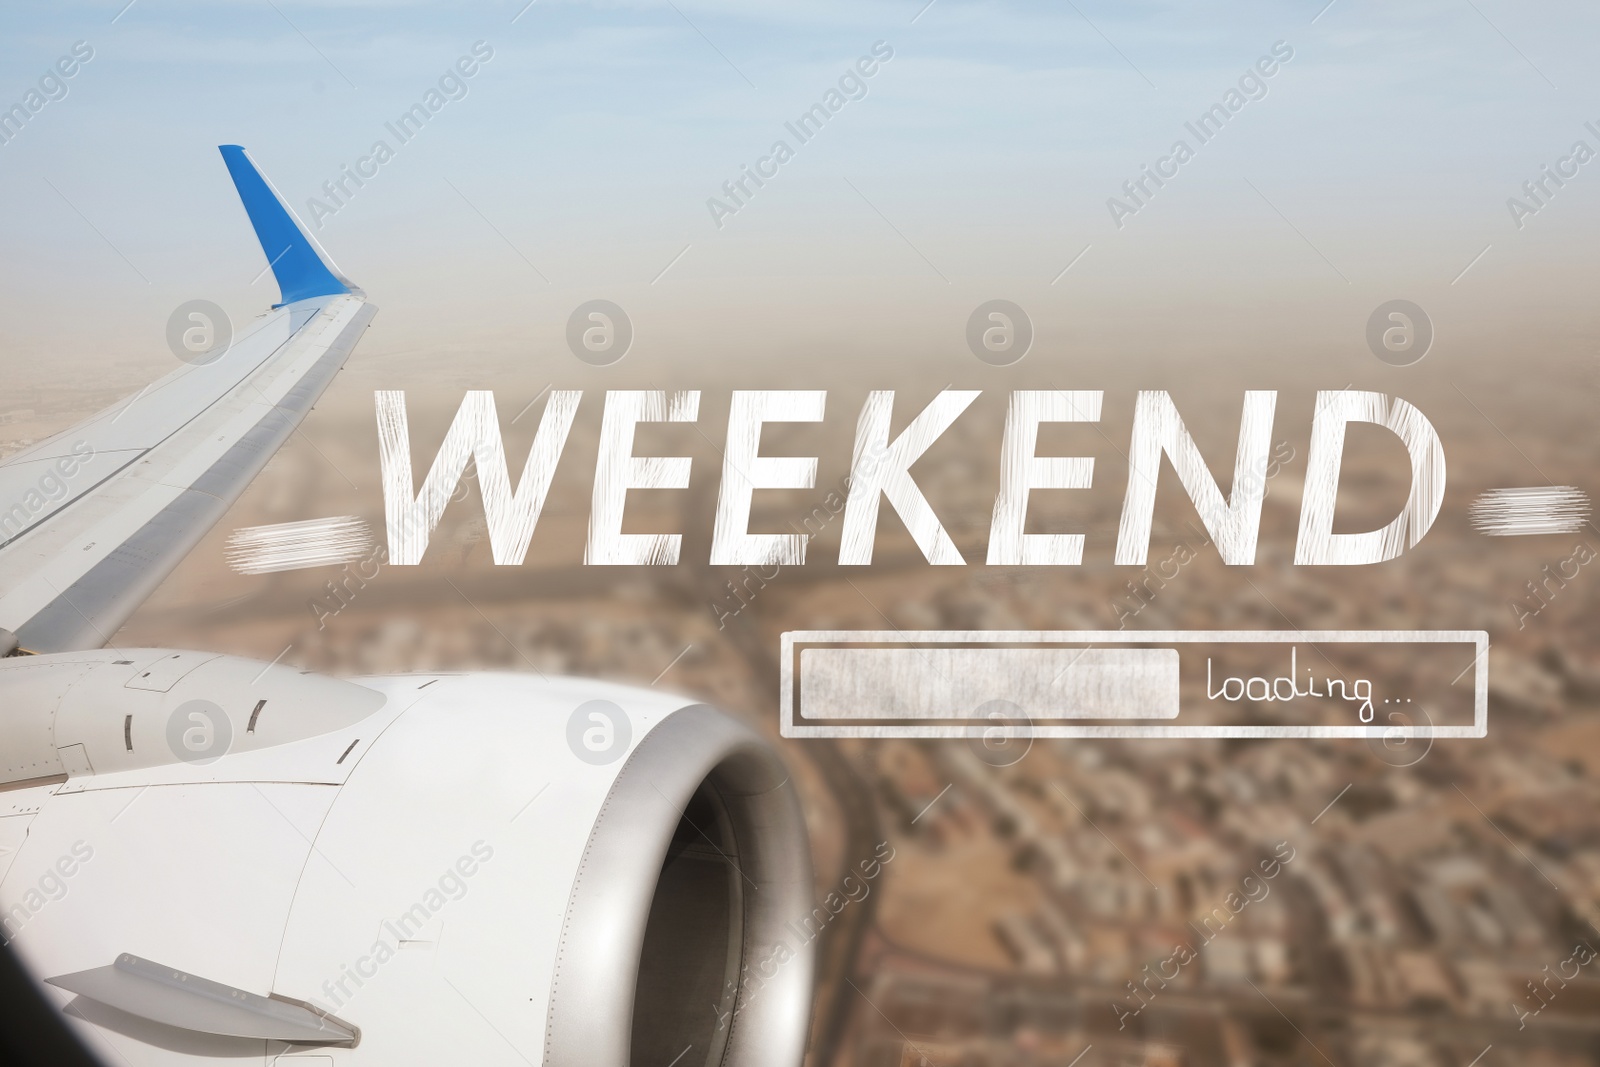 Image of Weekend coming soon. Illustration of progress bar and panoramic view of city from plane